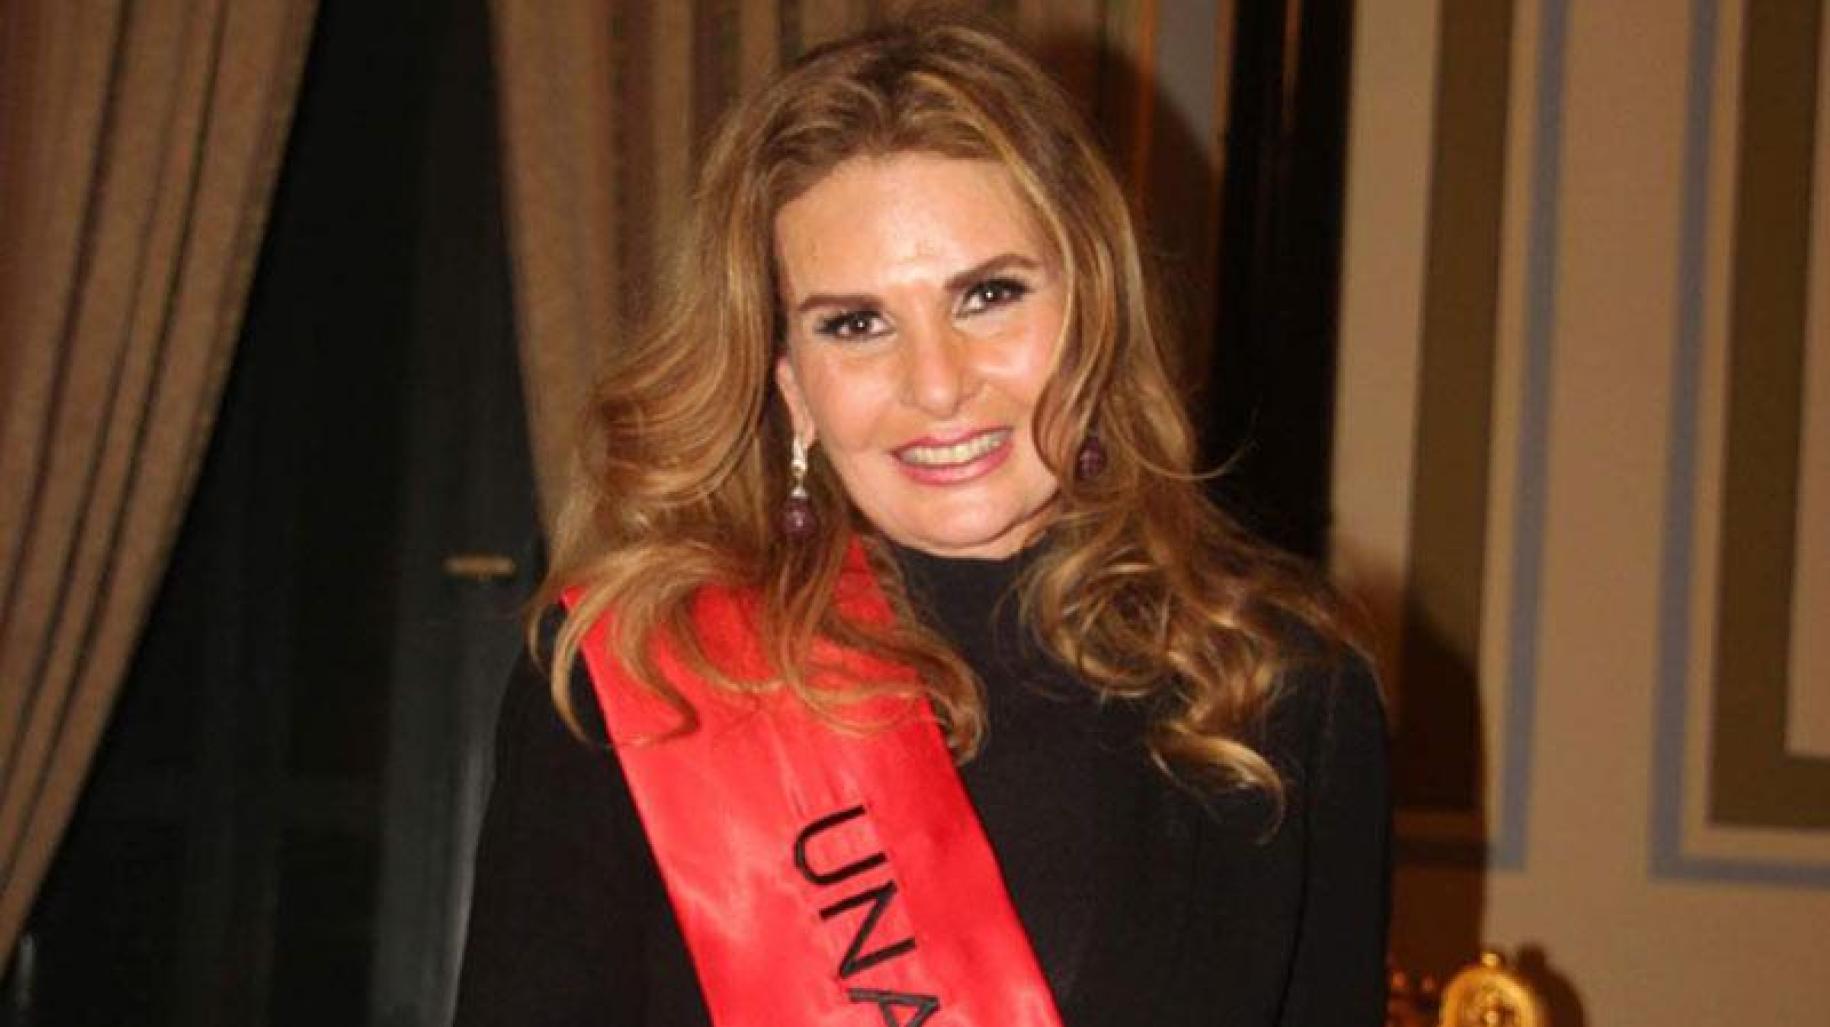 UNAIDS Goodwill Ambassador for the Middle East and North Africa, Yousra. 